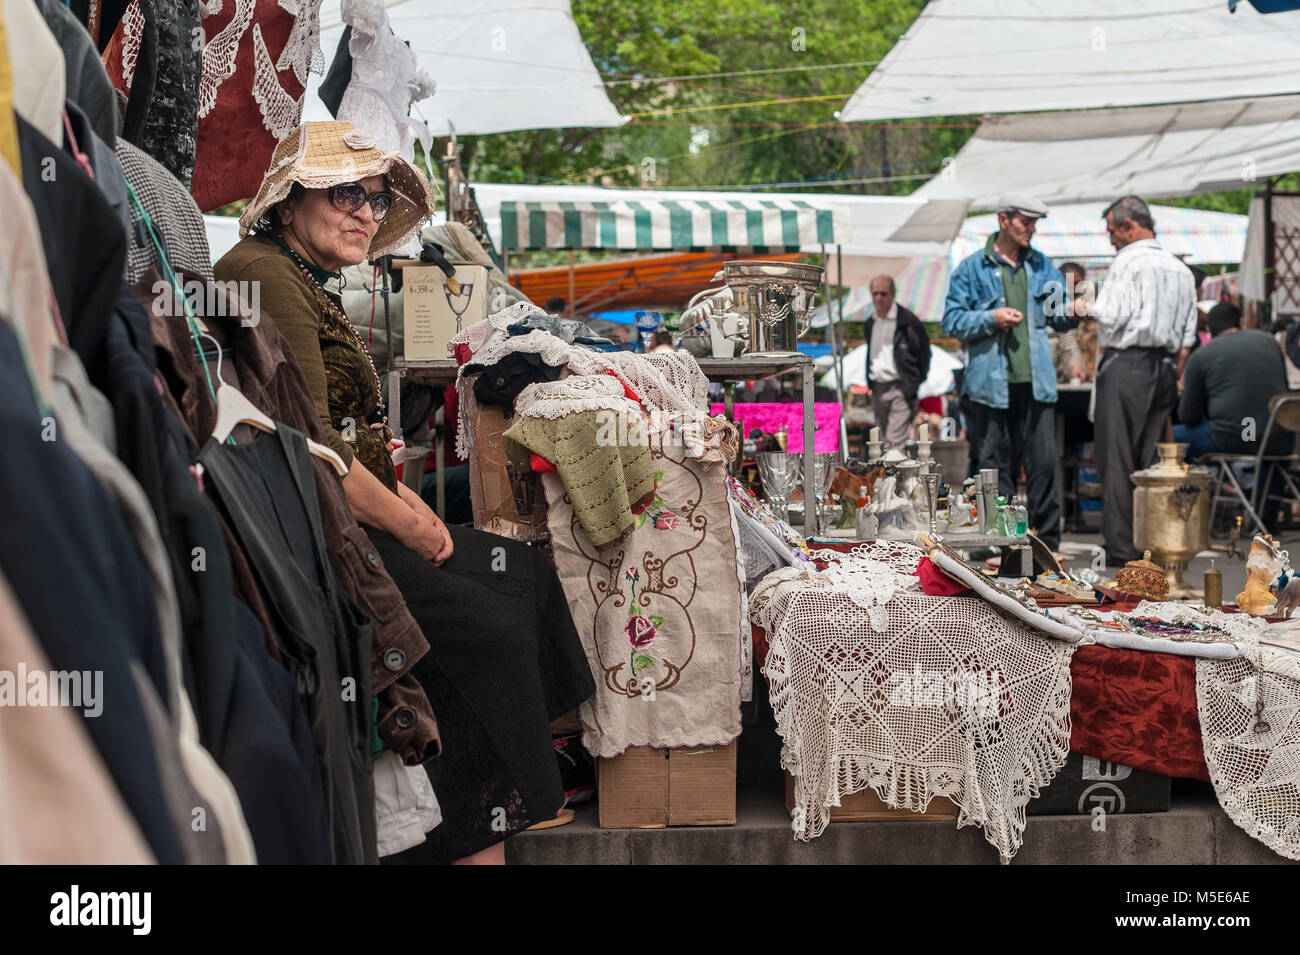 Old lady with hat, waiting for some customers at the flea market of Yerevan, Armenia. Stock Photo